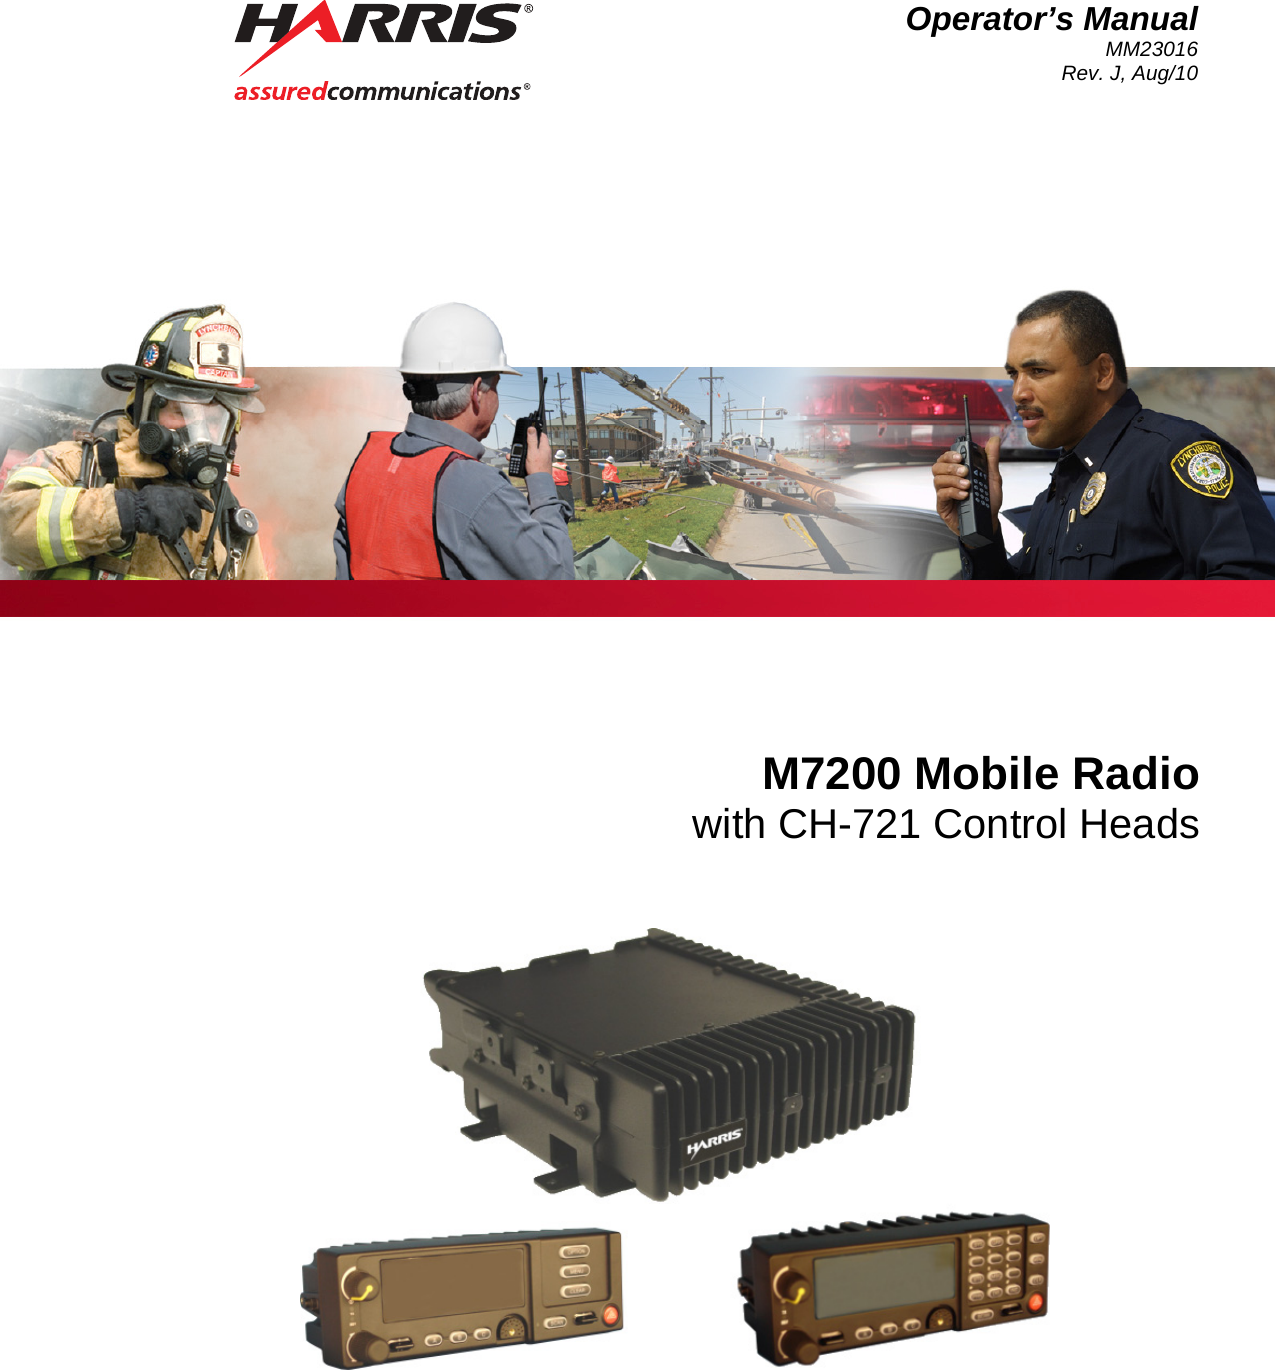  Operator’s ManualMM23016 Rev. J, Aug/10  M7200 Mobile Radio with CH-721 Control Heads 